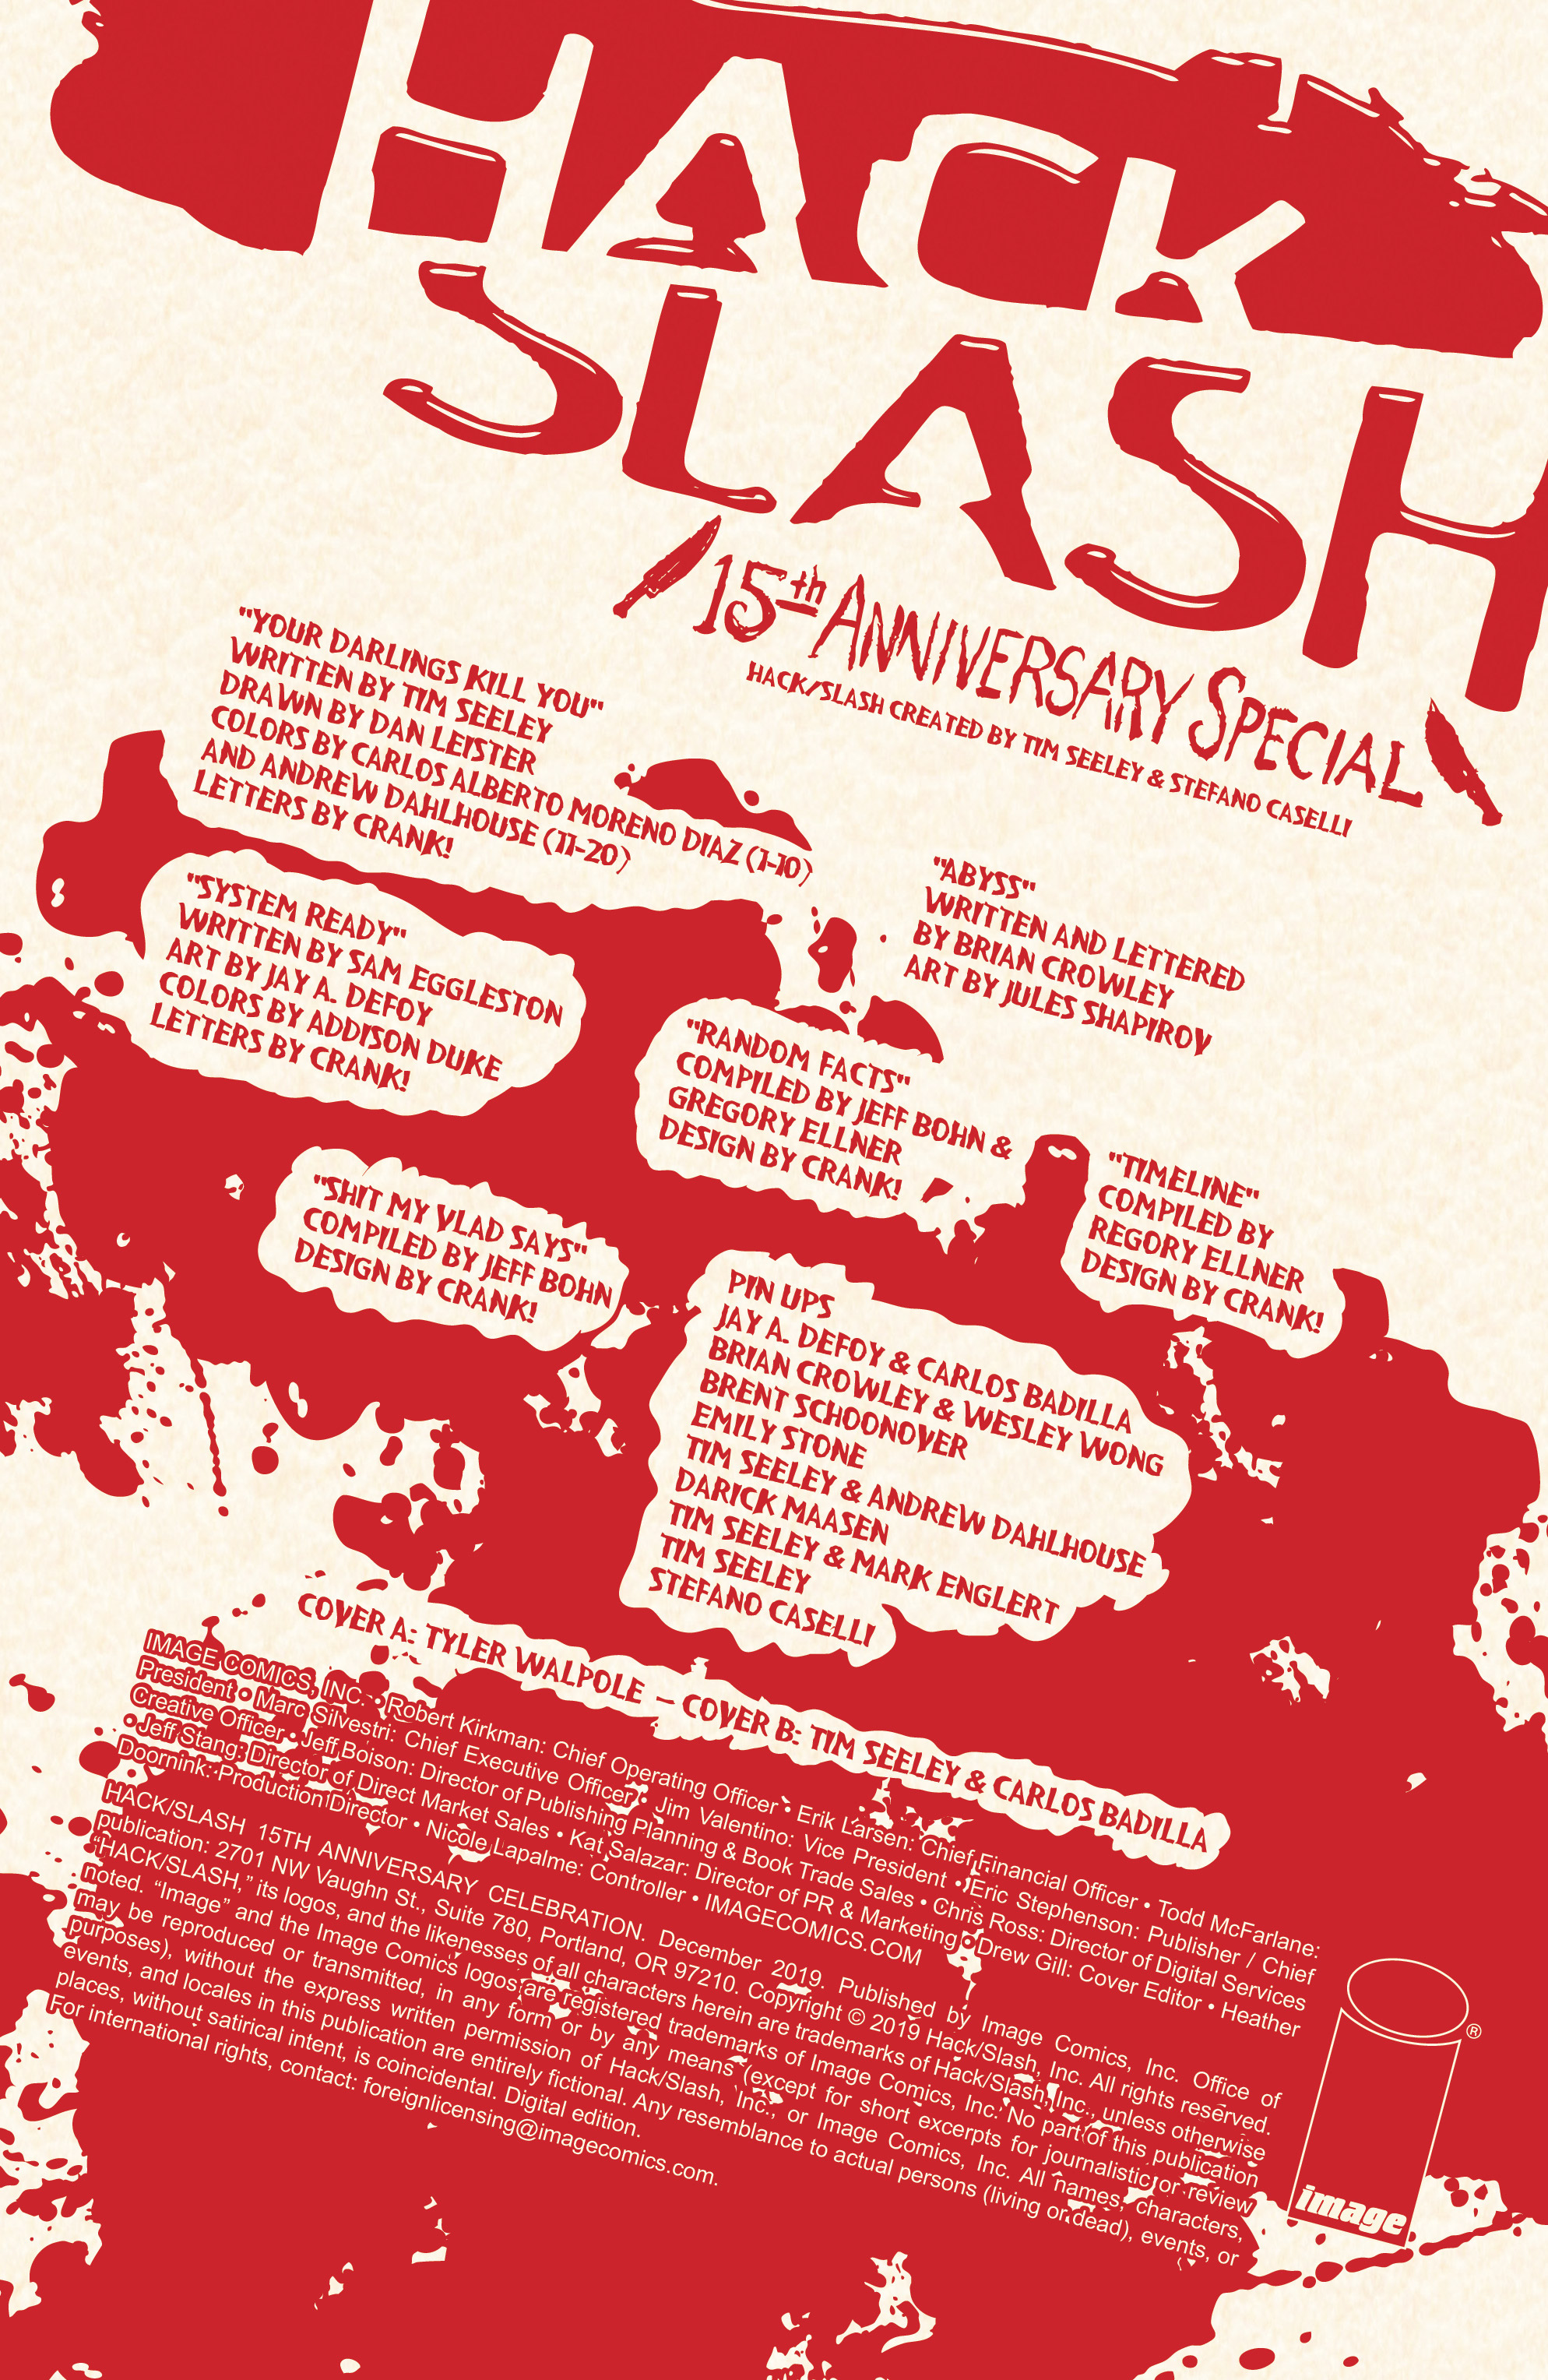 Read online Hack/Slash: 15th Anniversary Special comic -  Issue # Full - 2